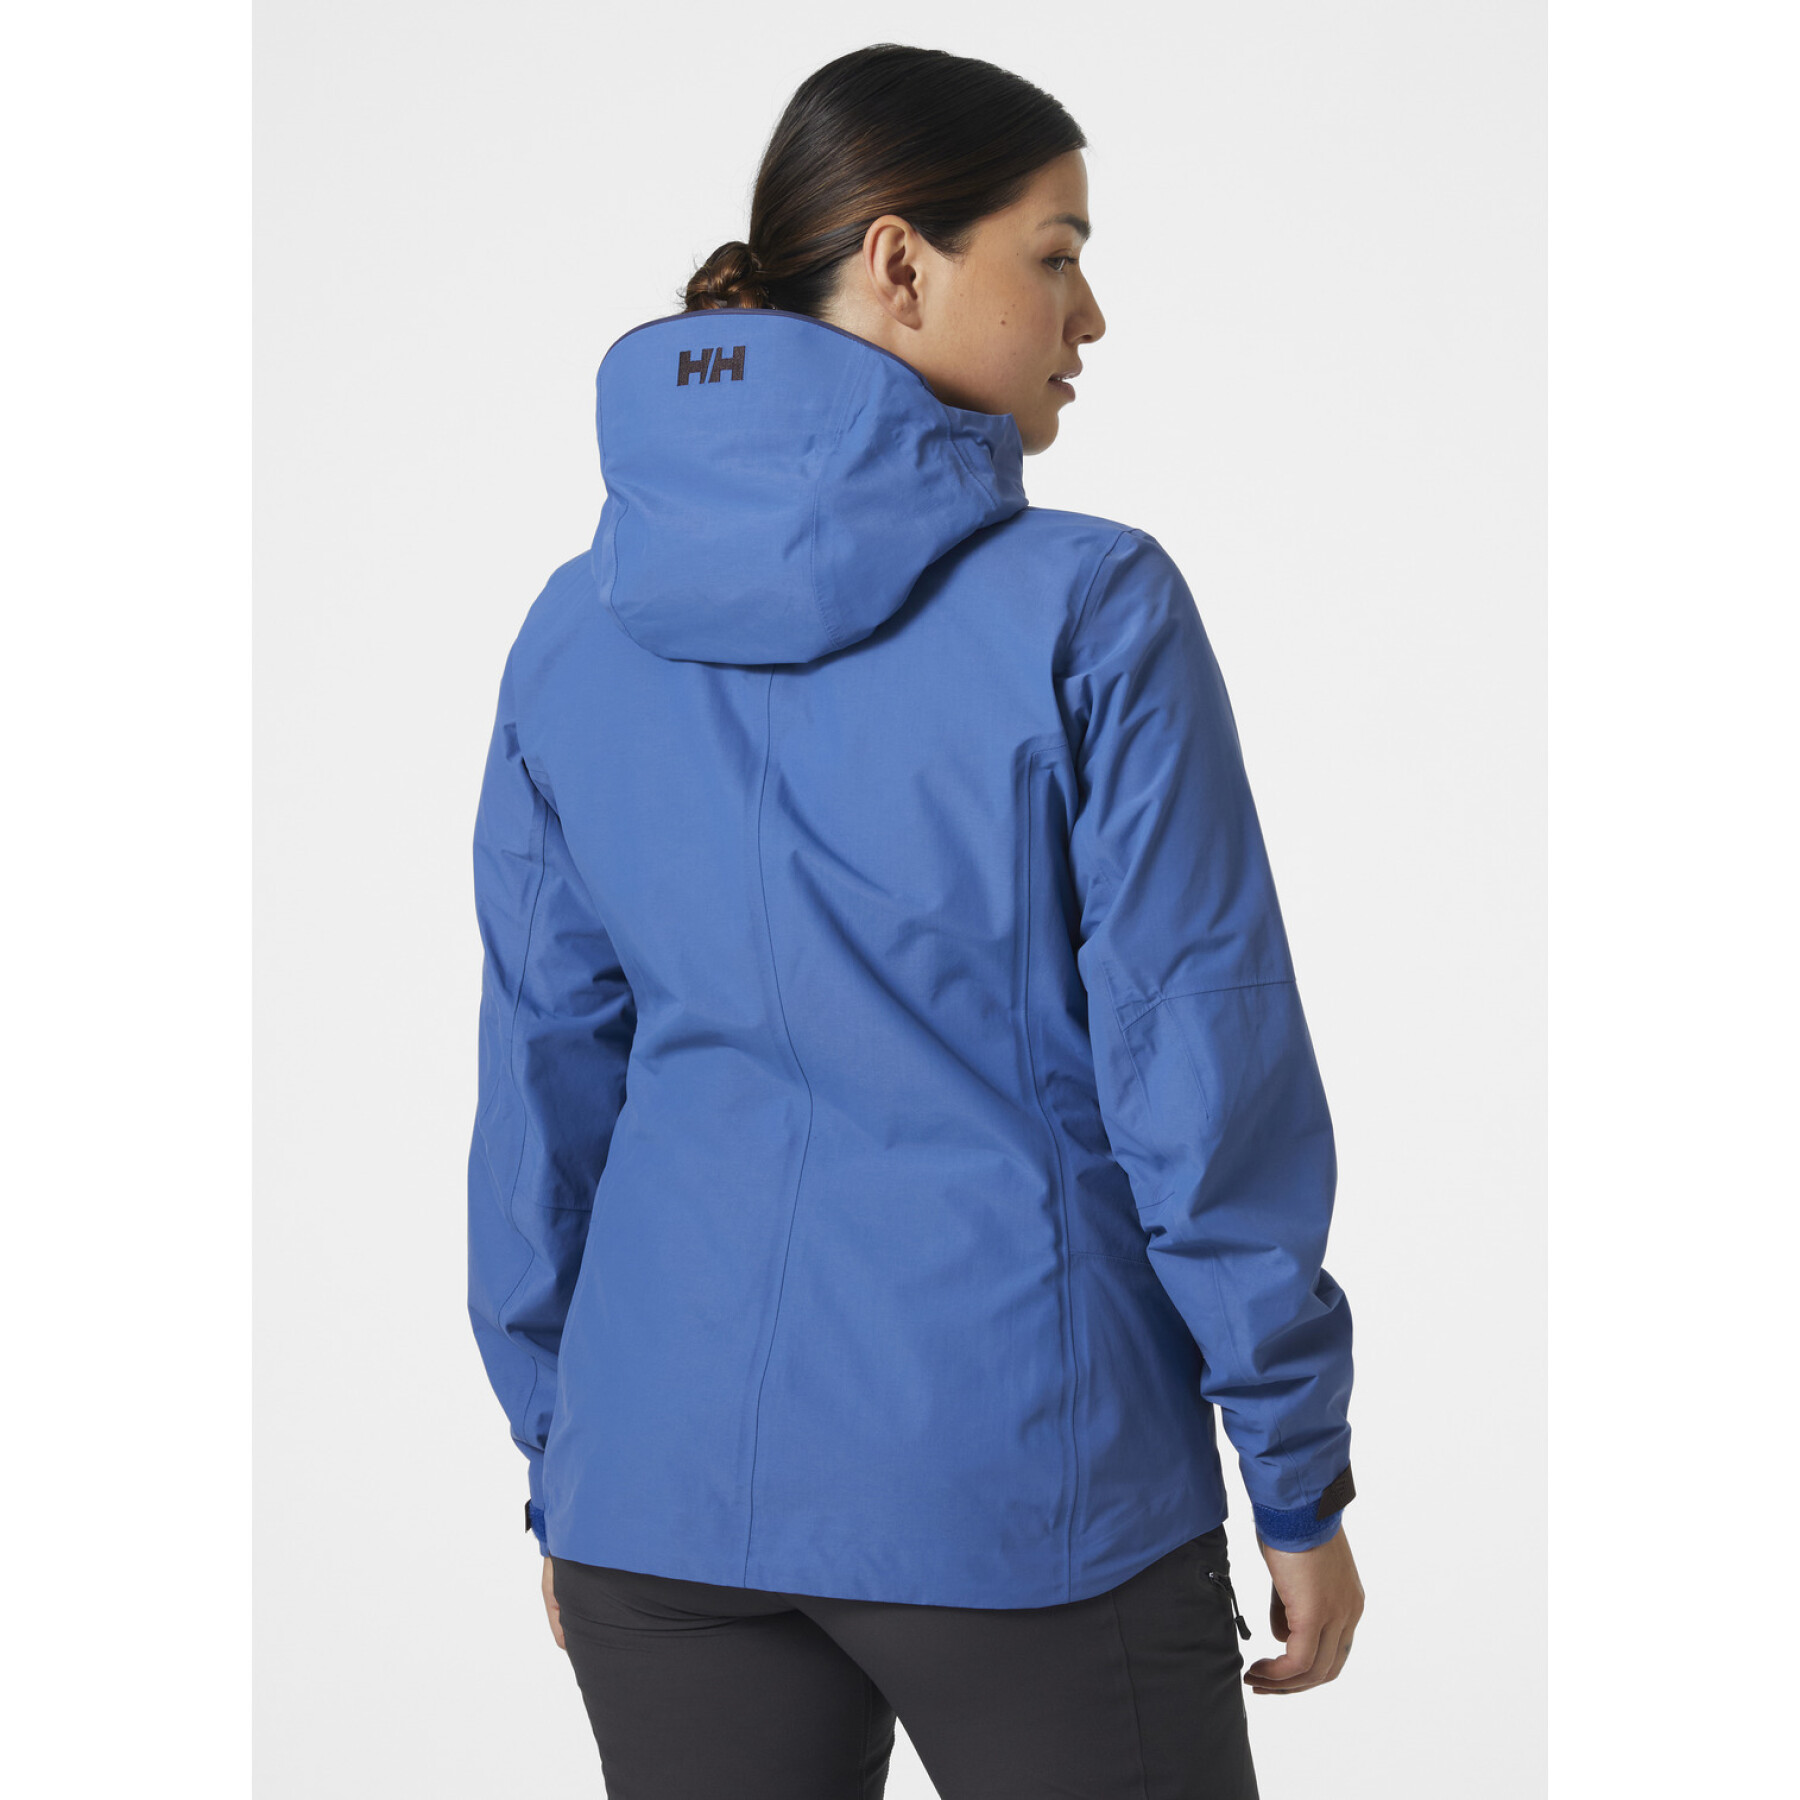 Chaqueta impermeable mujer Helly Hansen Odin 9 World 3.0